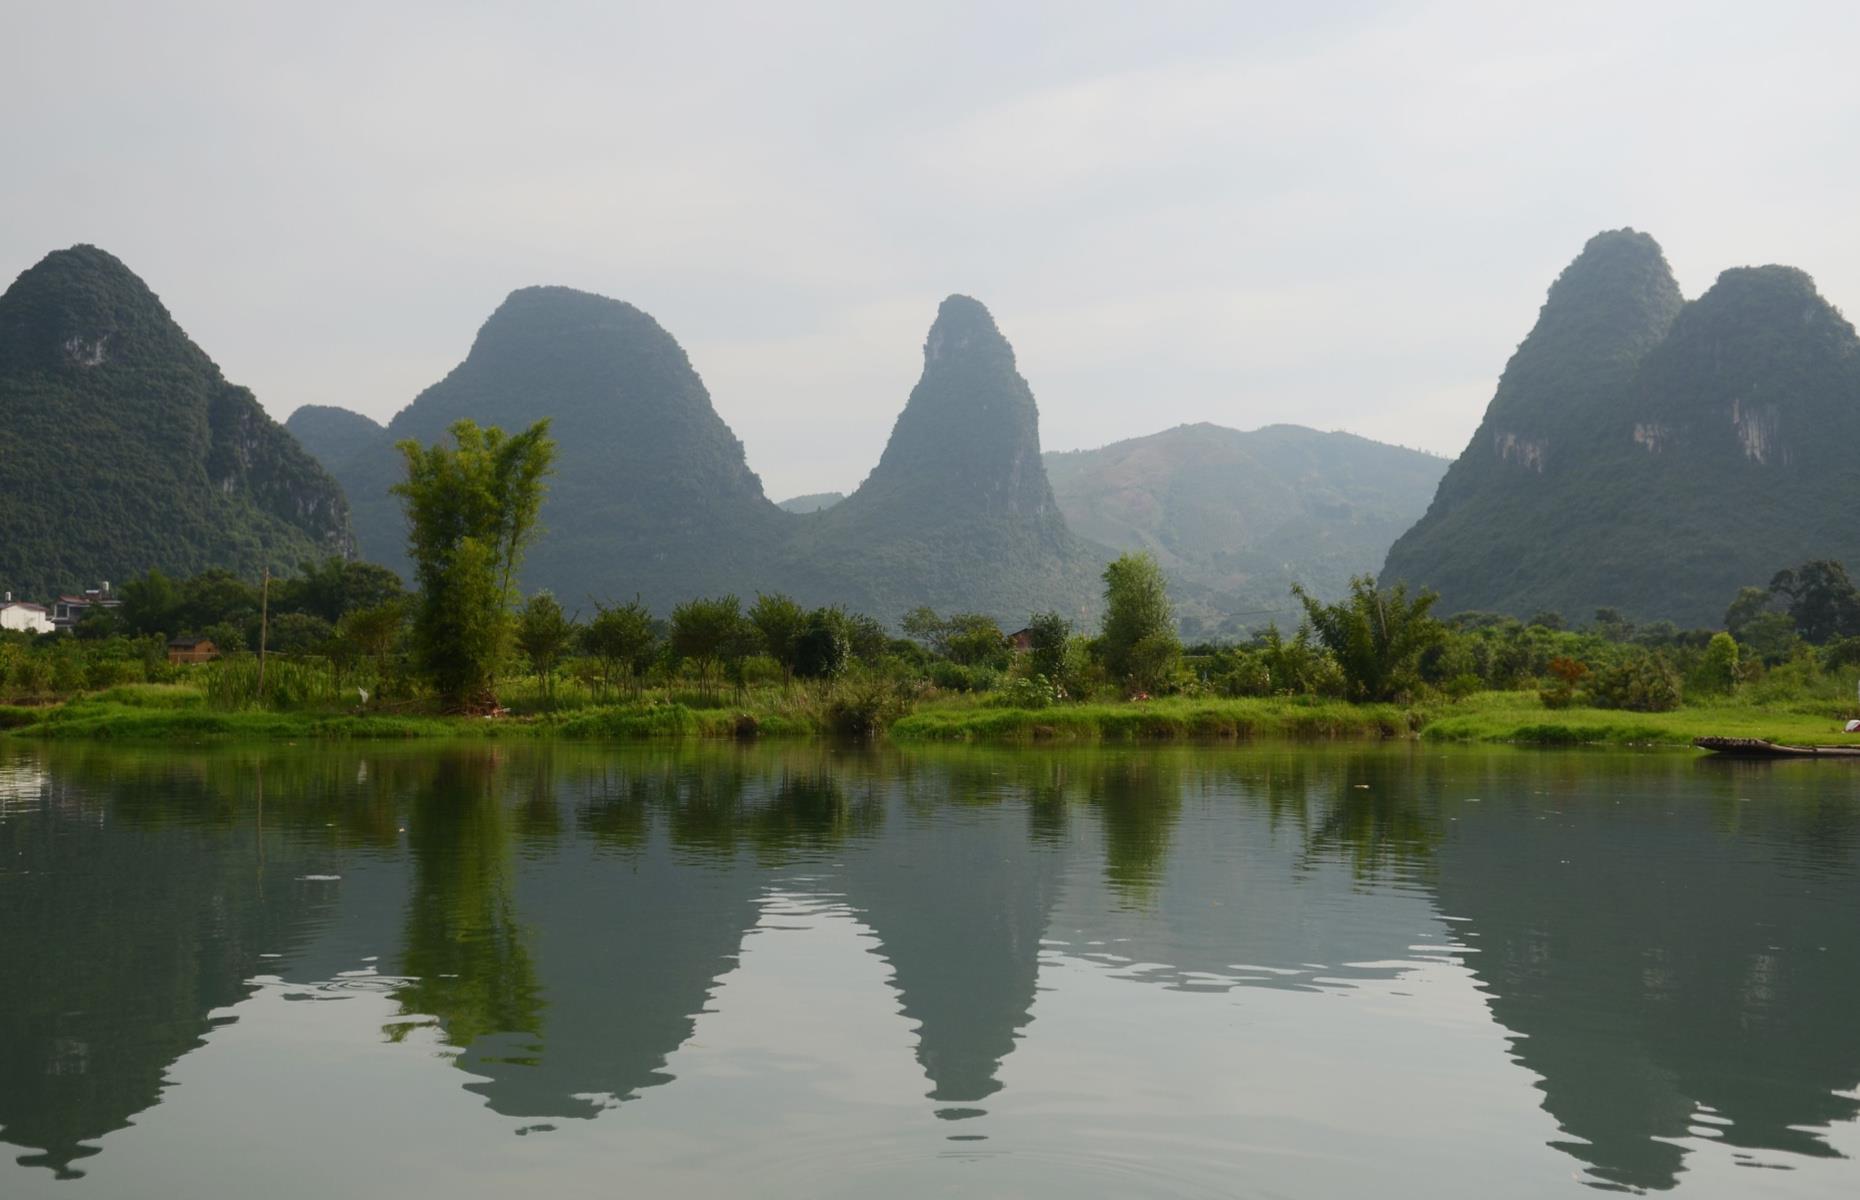 <p>Green fields and otherworldly mountains are hallmarks of the Chinese countryside, both of which are abundant in <a href="https://national-parks.org/china/guilin-lijiang">this park</a> located in the northeastern region of Guangxi Zhuang. The Li (or Lijiang) River flows through the park, creating some unforgettable vistas. Limestone mountain peaks complement the river, which is best enjoyed on a boat cruising along the water as it winds through the electric green landscape.</p>